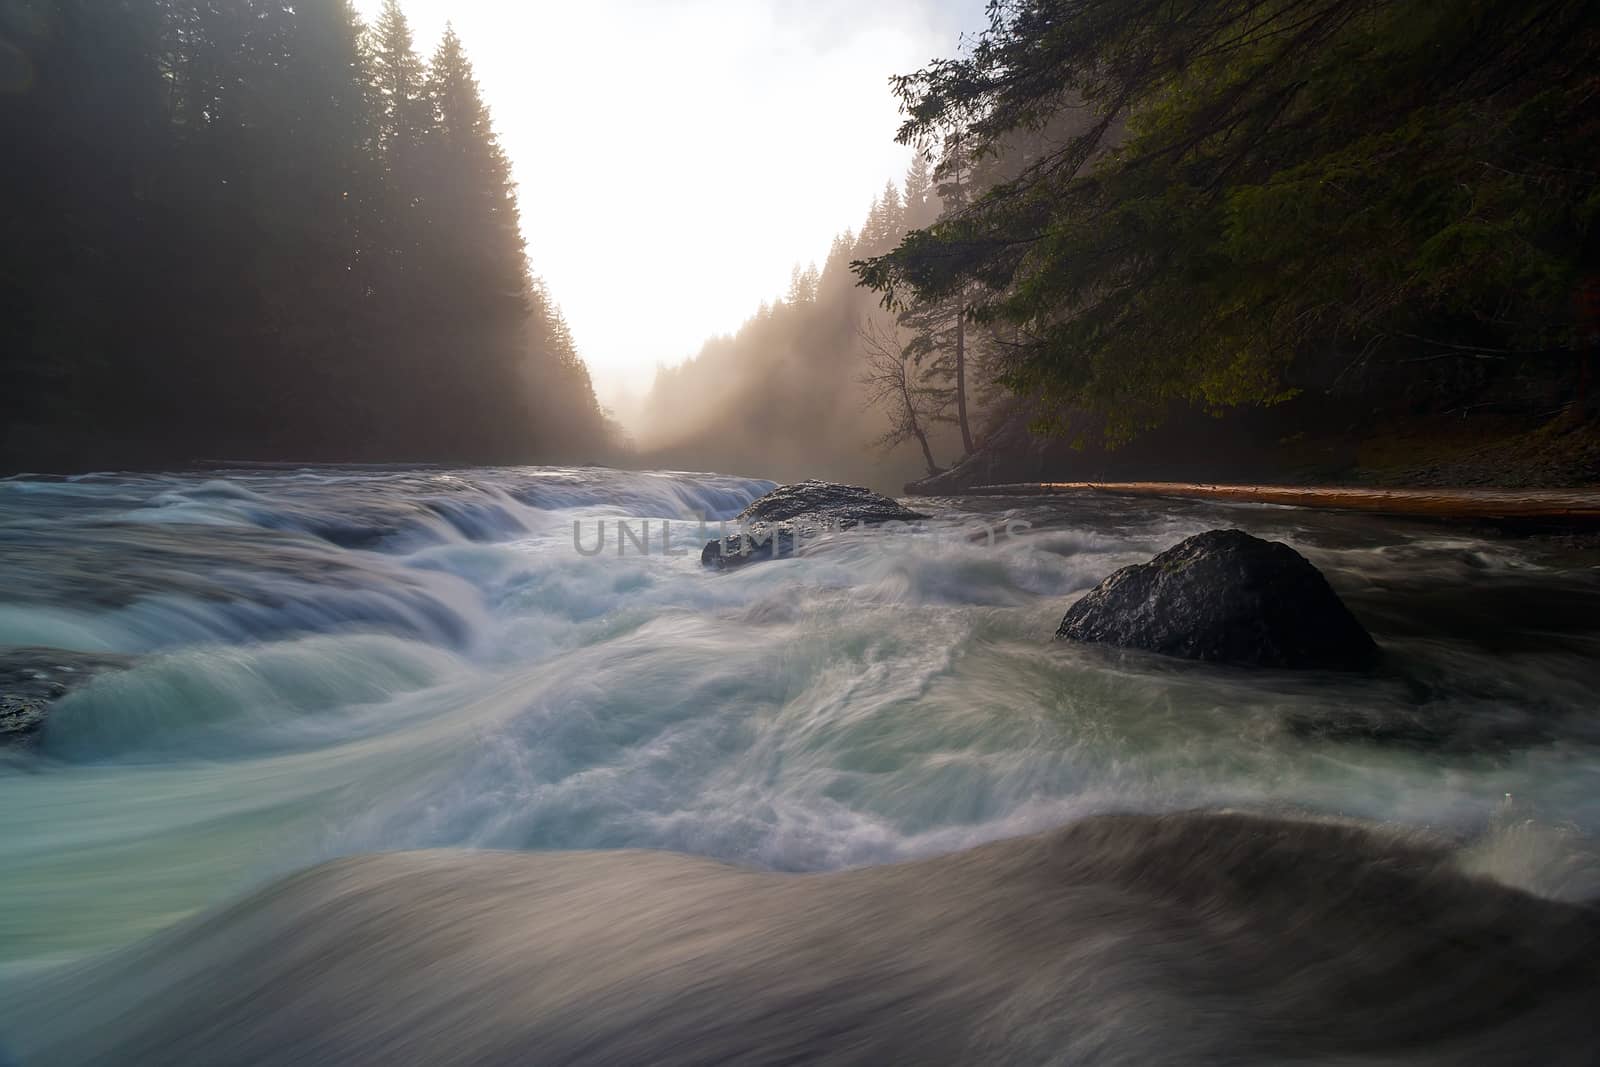 Top of Lower Lewis River Falls in Gifford Pinchot National Forest during sunset